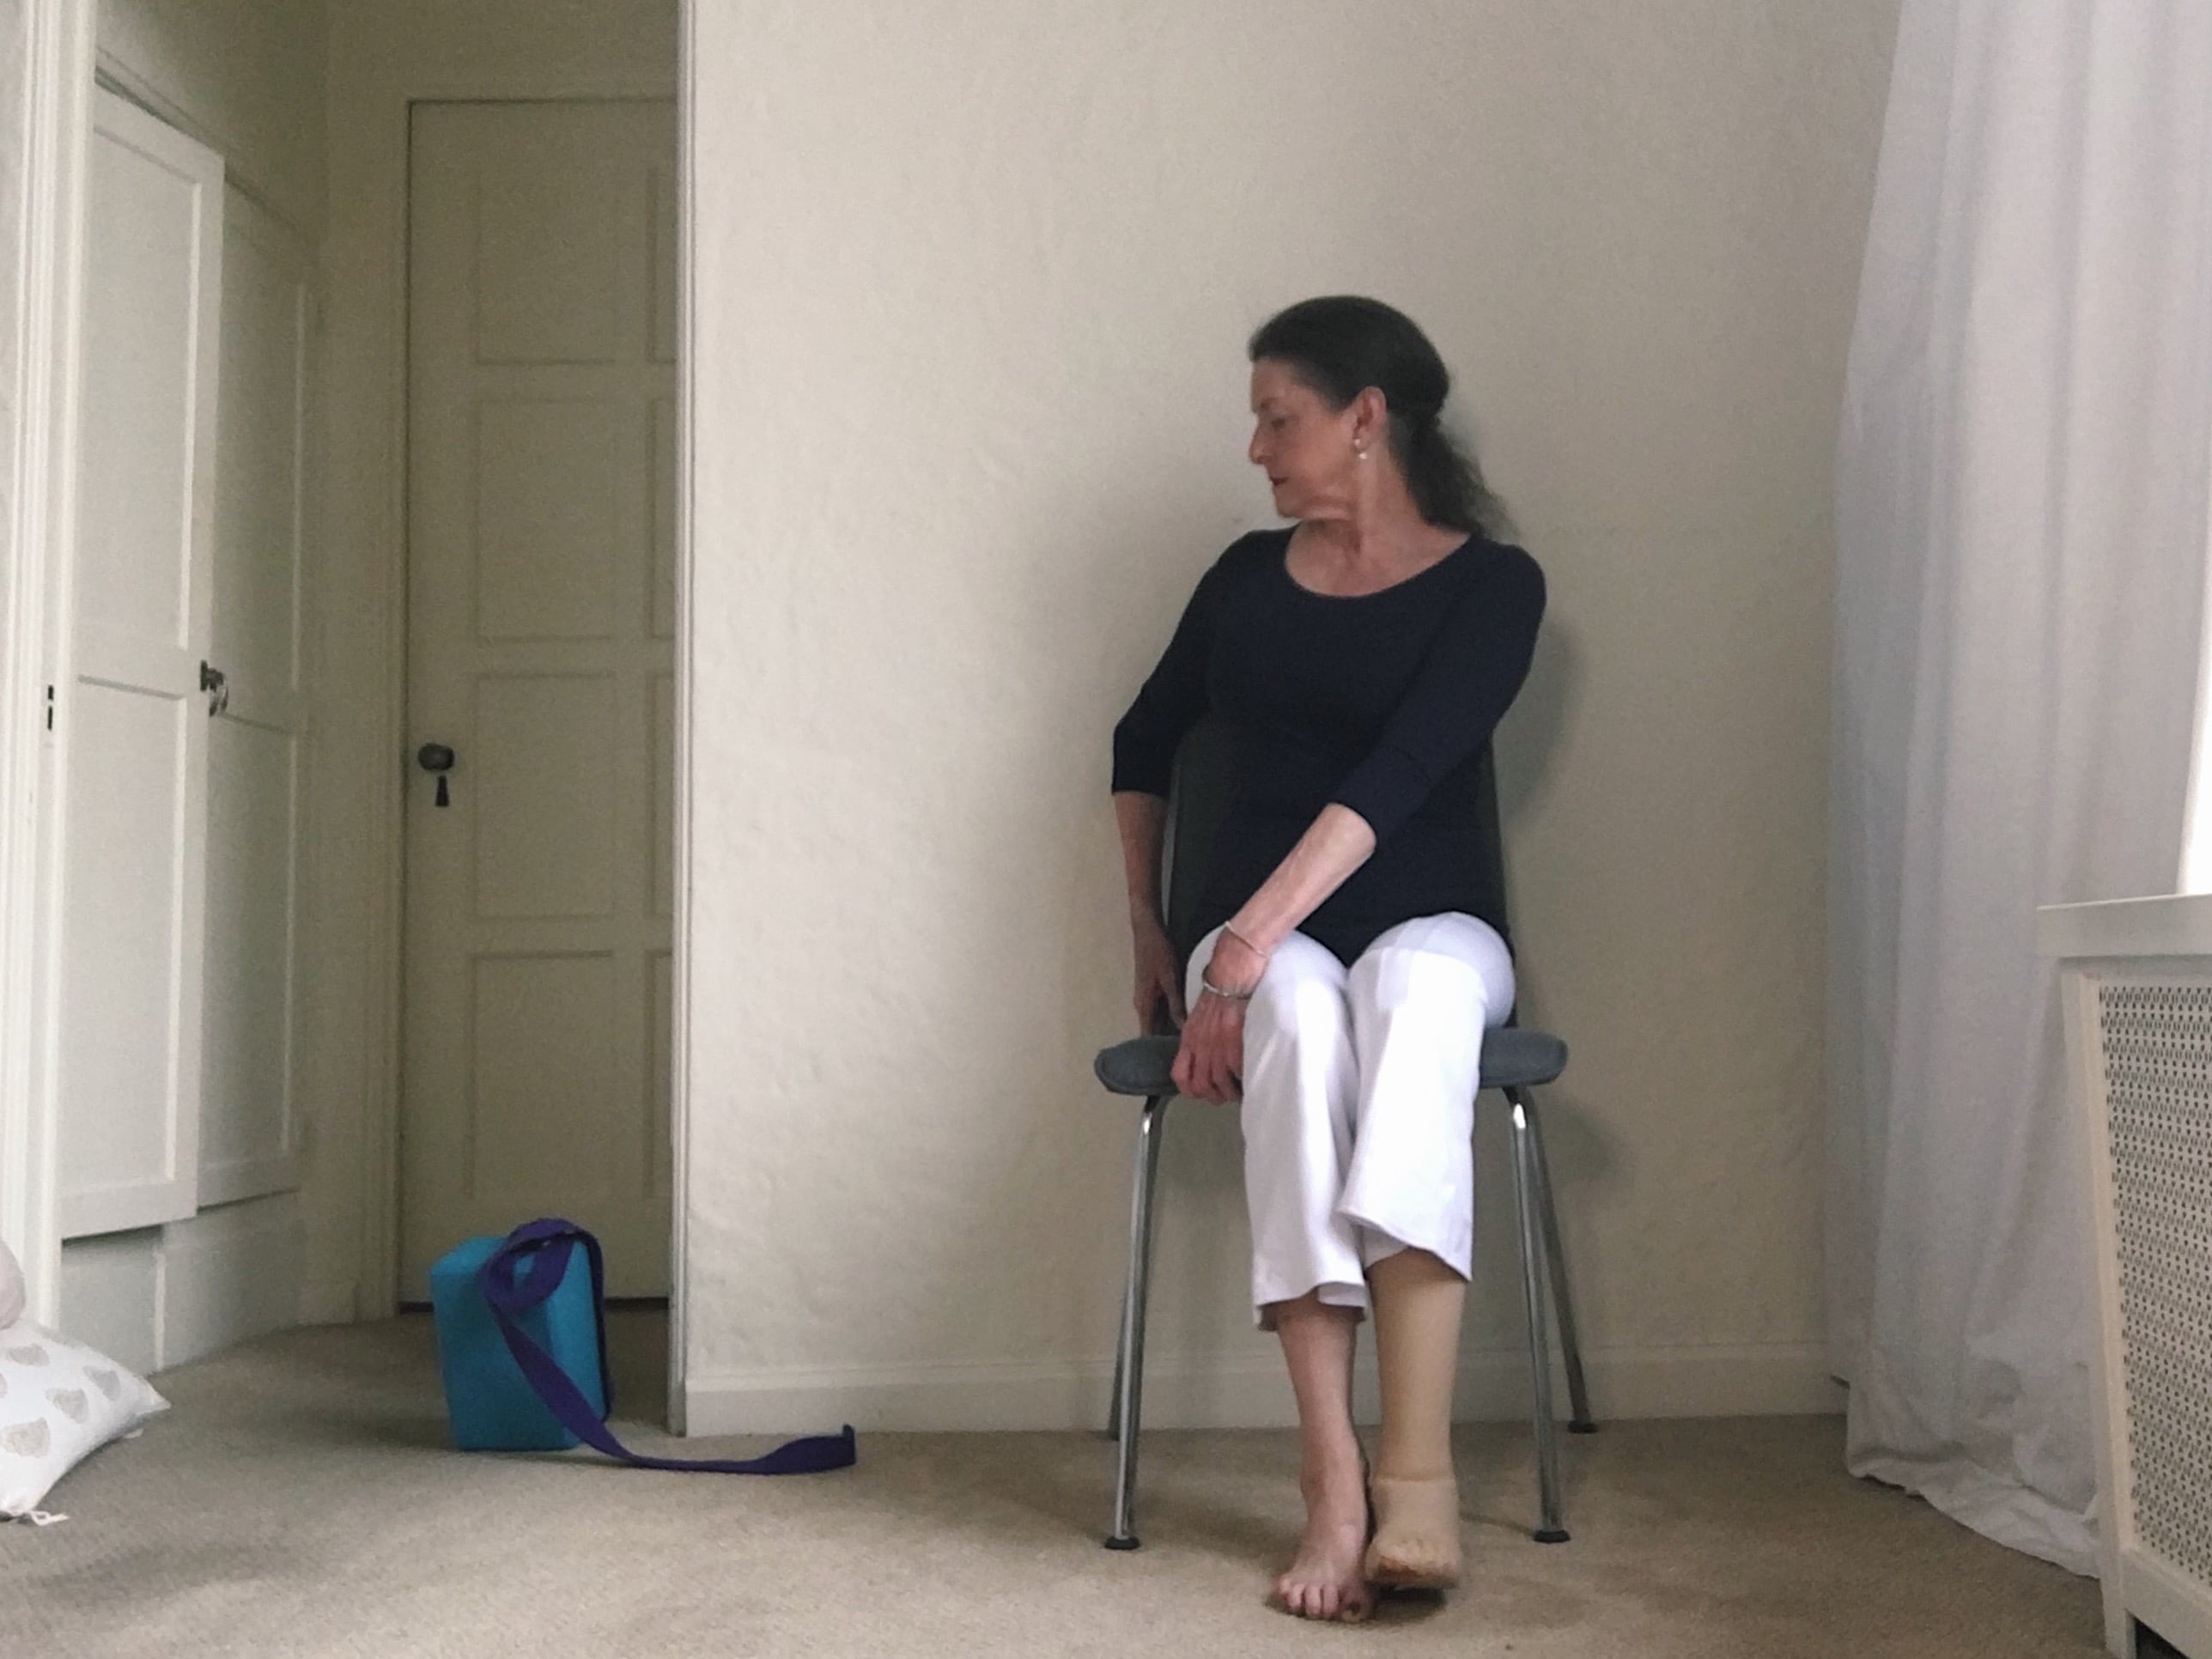 Full-Body Adaptive Seated Yoga Flow in a Chair